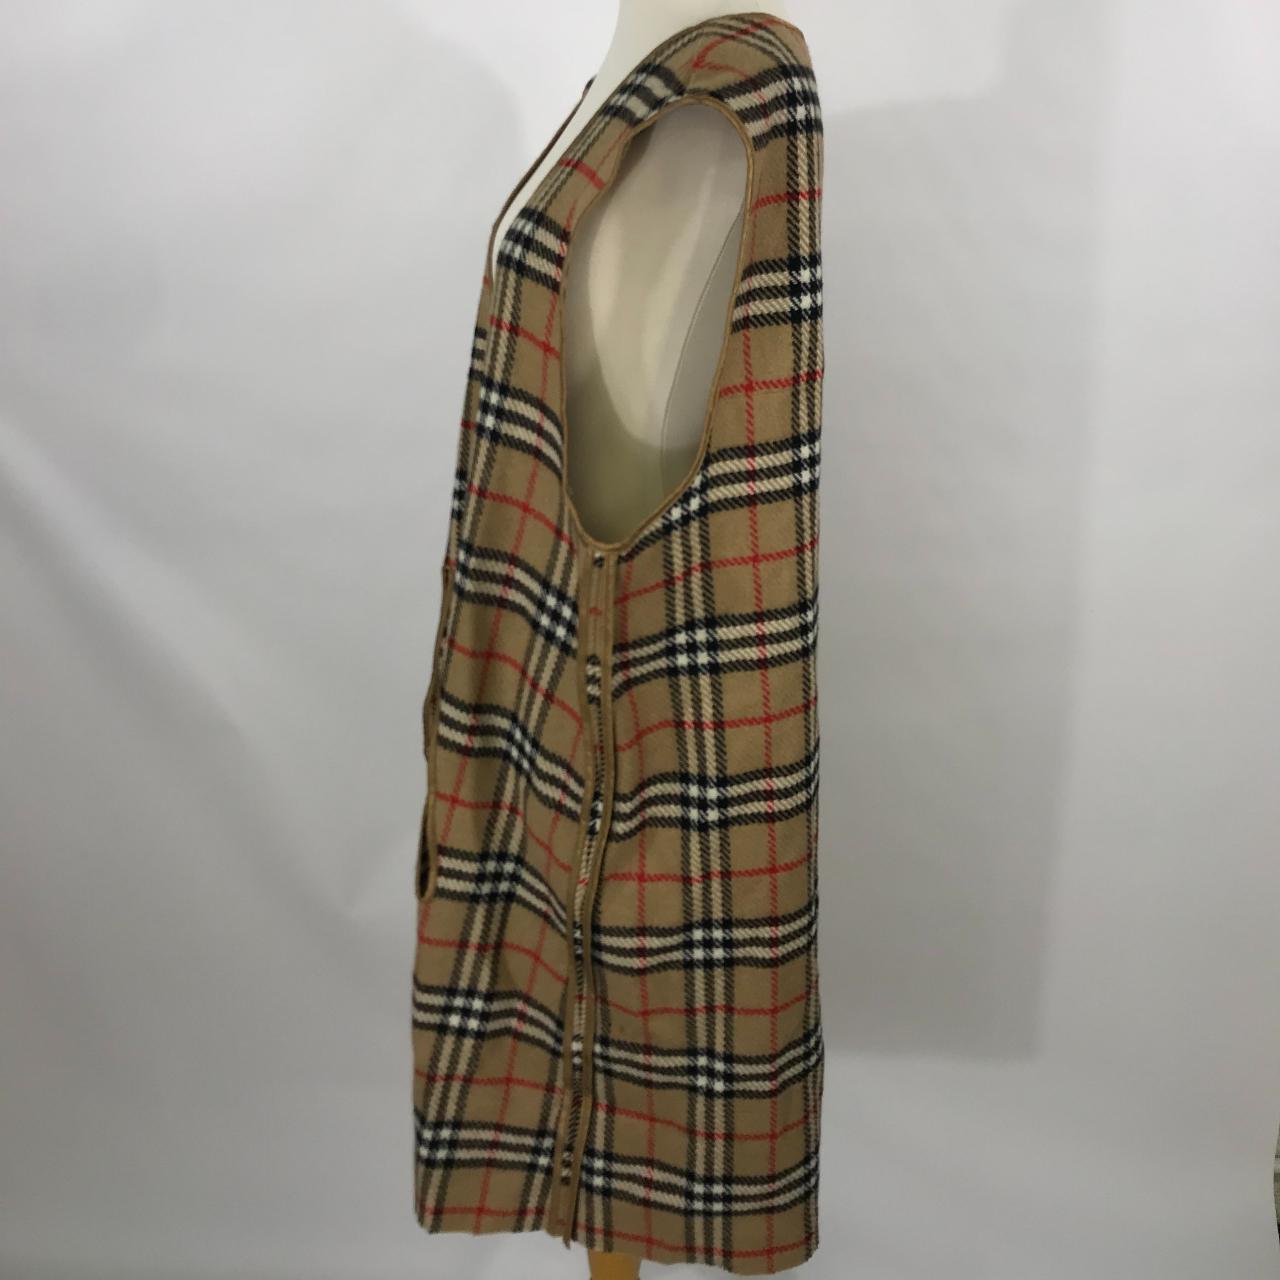 Product Image 2 - Vintage 
Burberry
Trench coat liner or